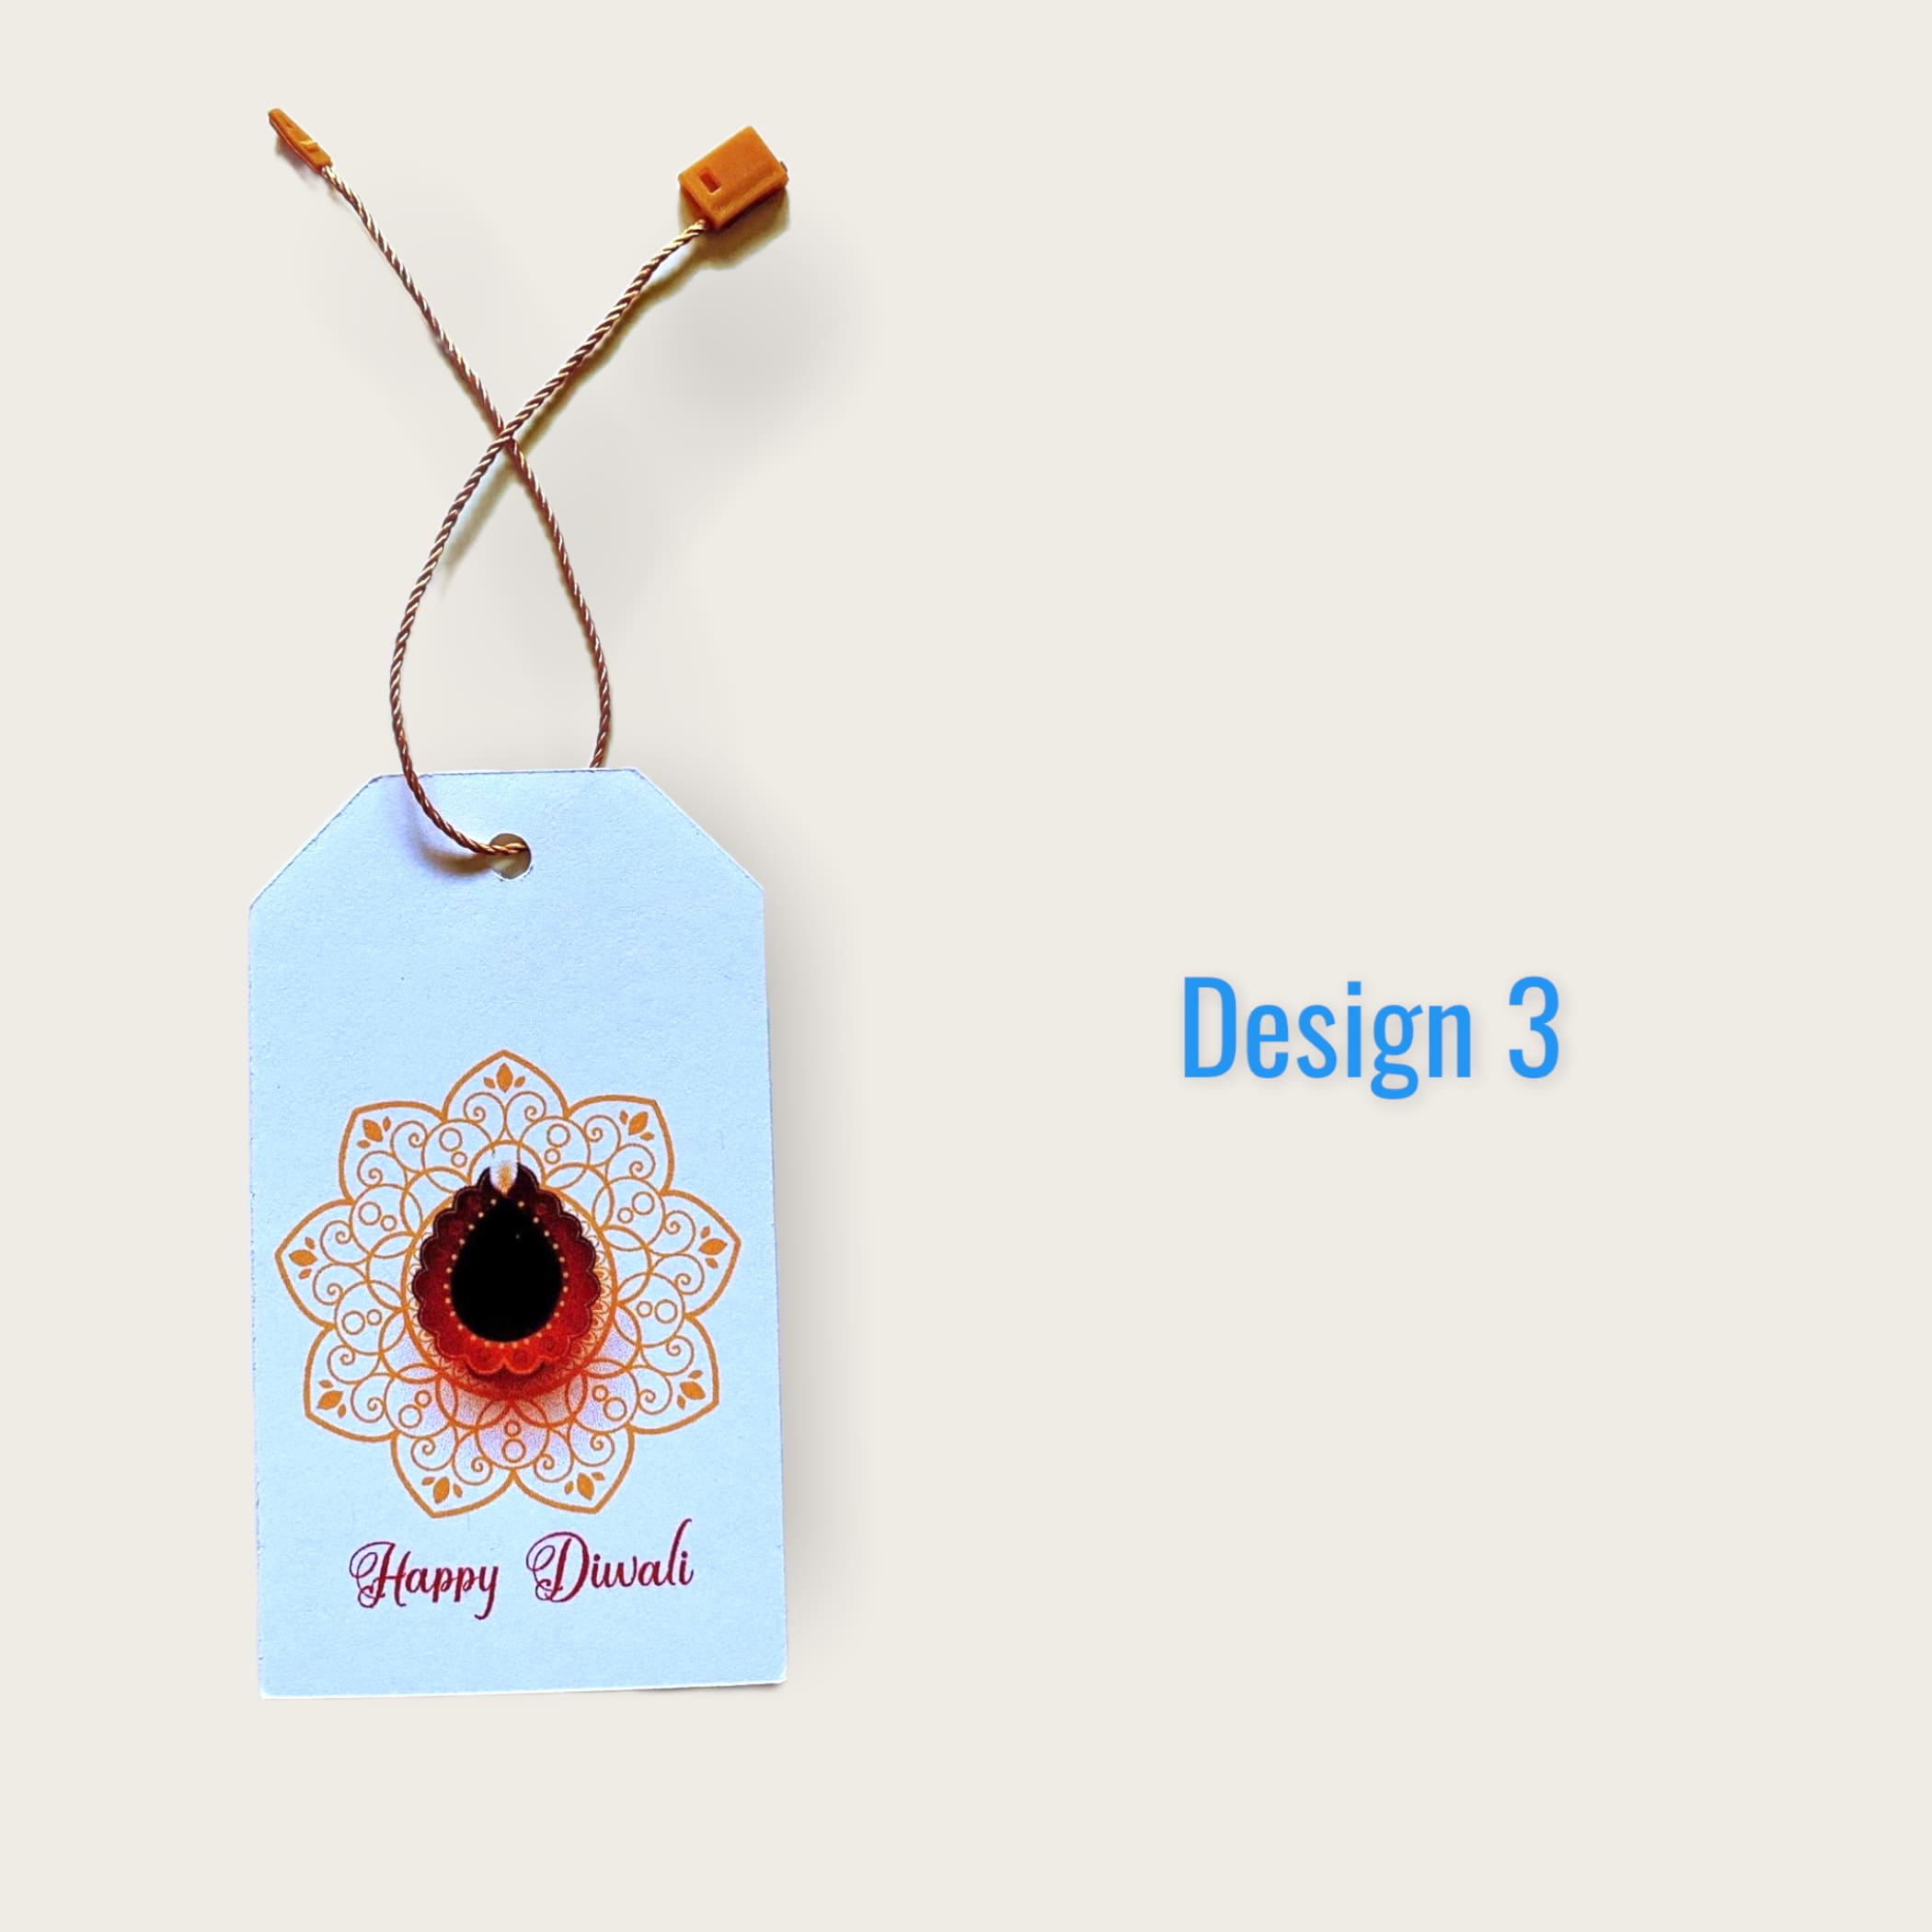 10 Printed Happy Diwali Gift Tags For Gifts Bags Deewali